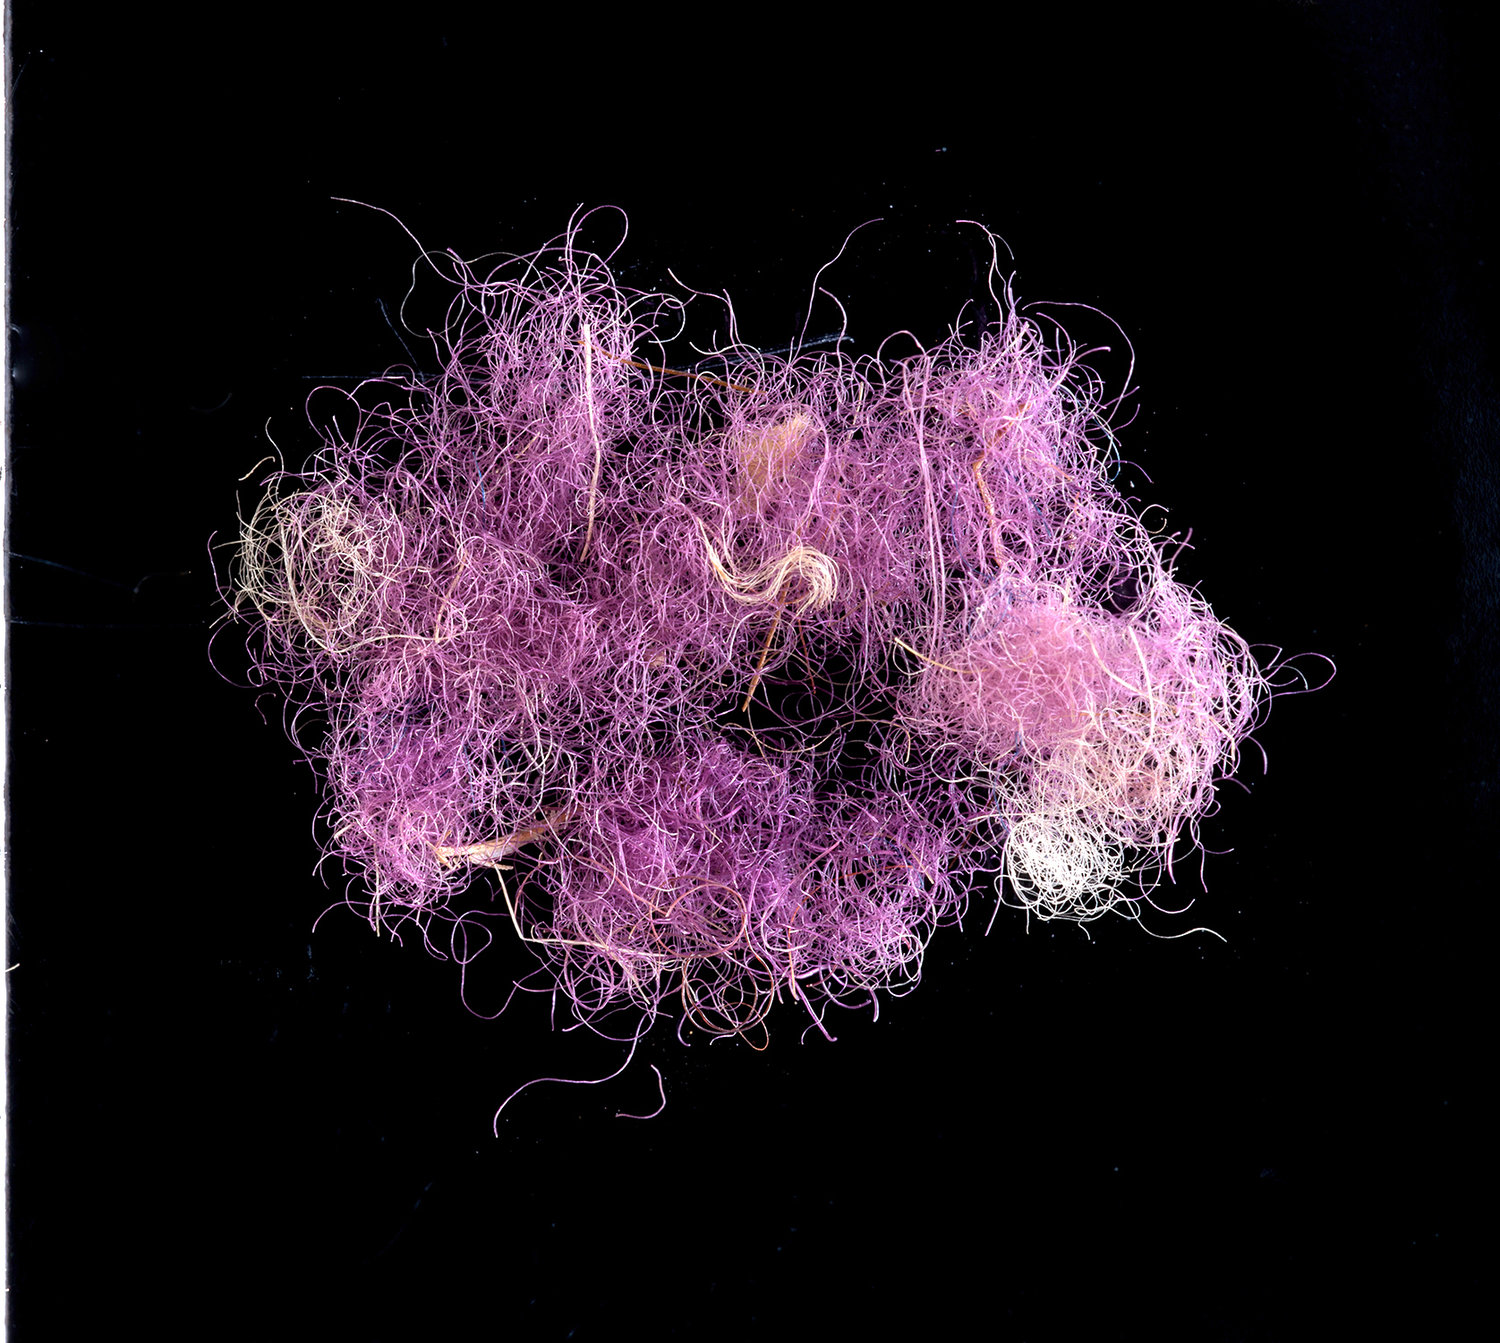 Wool fibers dyed with Royal Purple, dating to approximately 1,000 BCE, found in the Timna Valley in southern Israel.